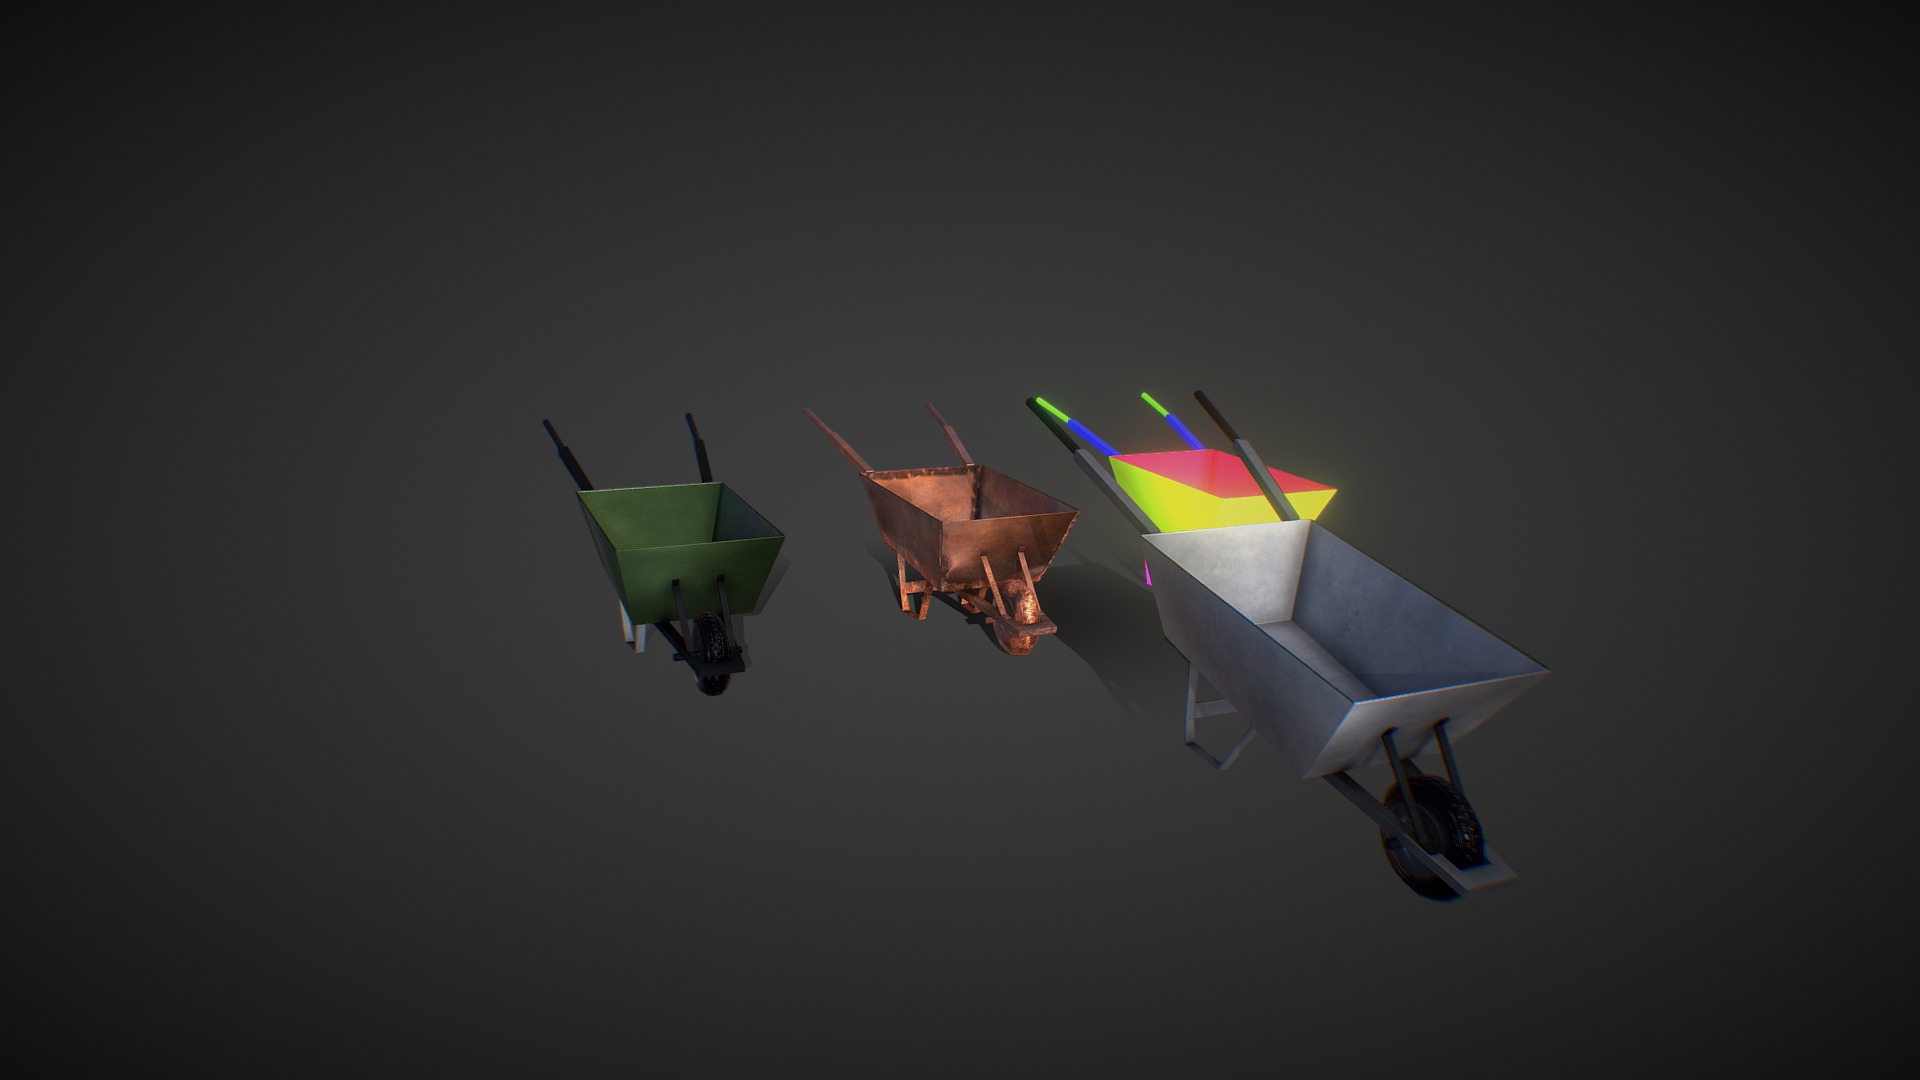 3D model Wheelbarrow  -low poly ar/vr/mobile model - This is a 3D model of the Wheelbarrow  -low poly ar/vr/mobile model. The 3D model is about a couple of airplanes flying in the sky.